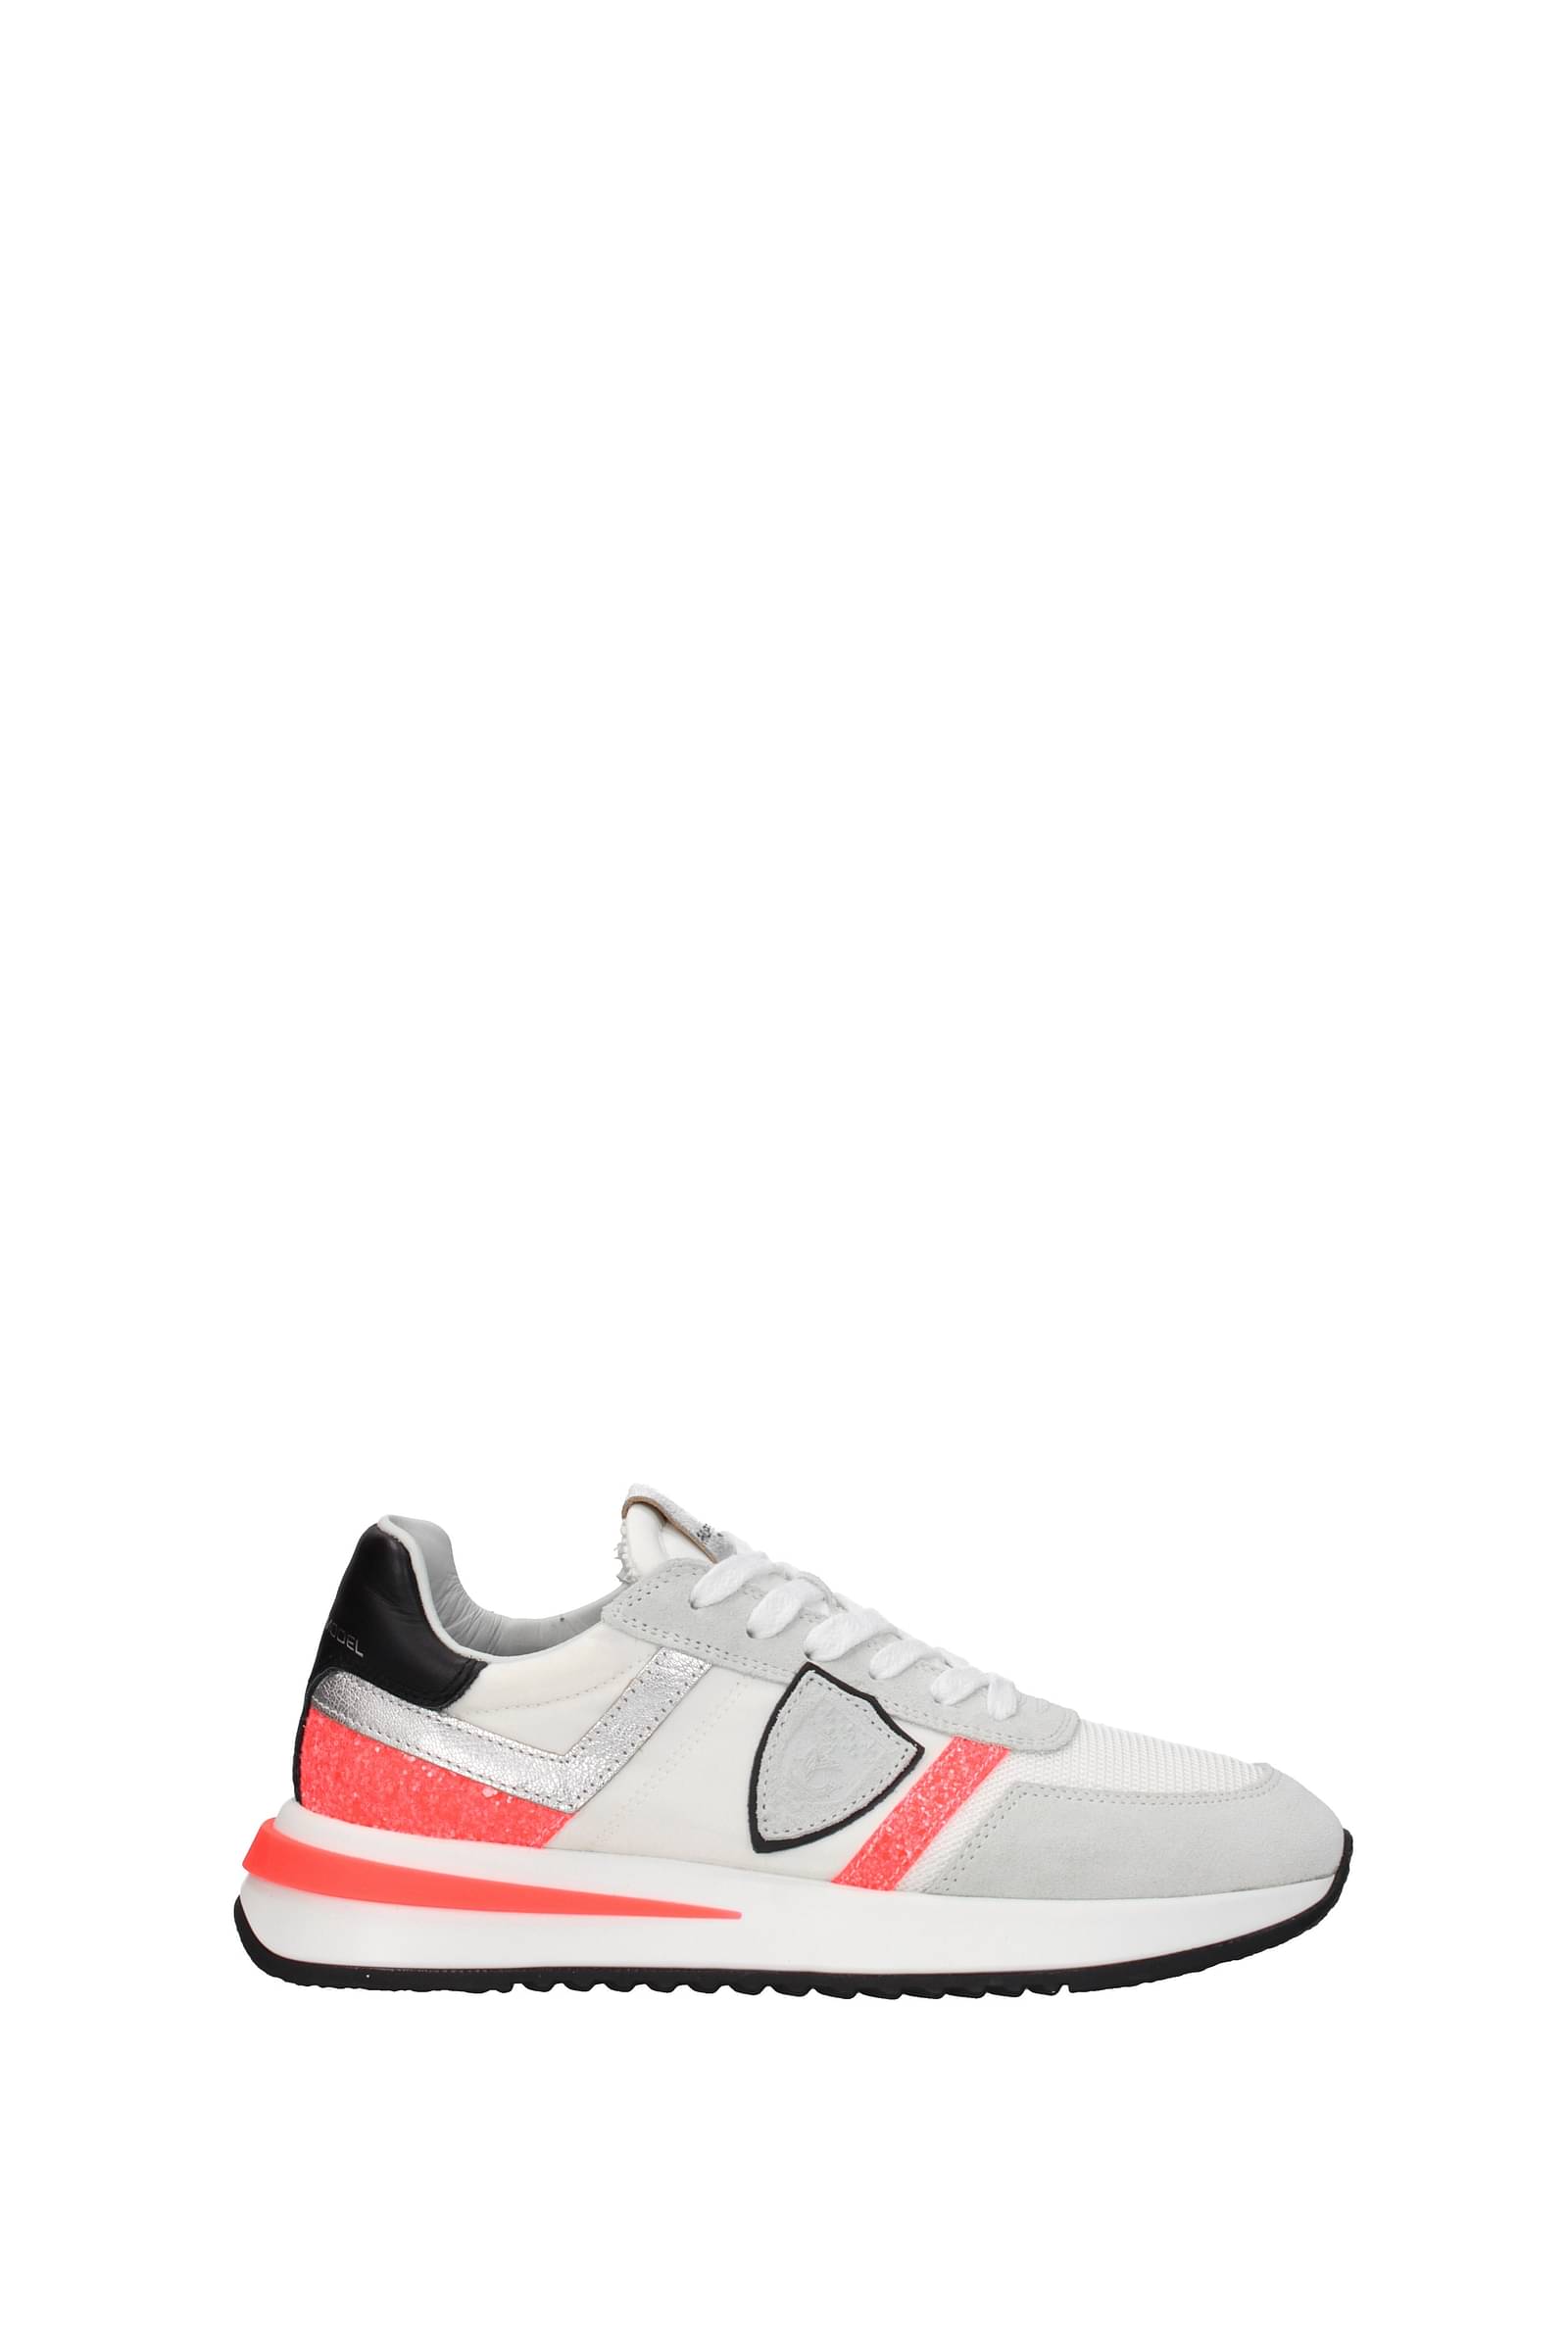 Vince Oasis Mixed Leather Retro Sneakers - Bergdorf Goodman